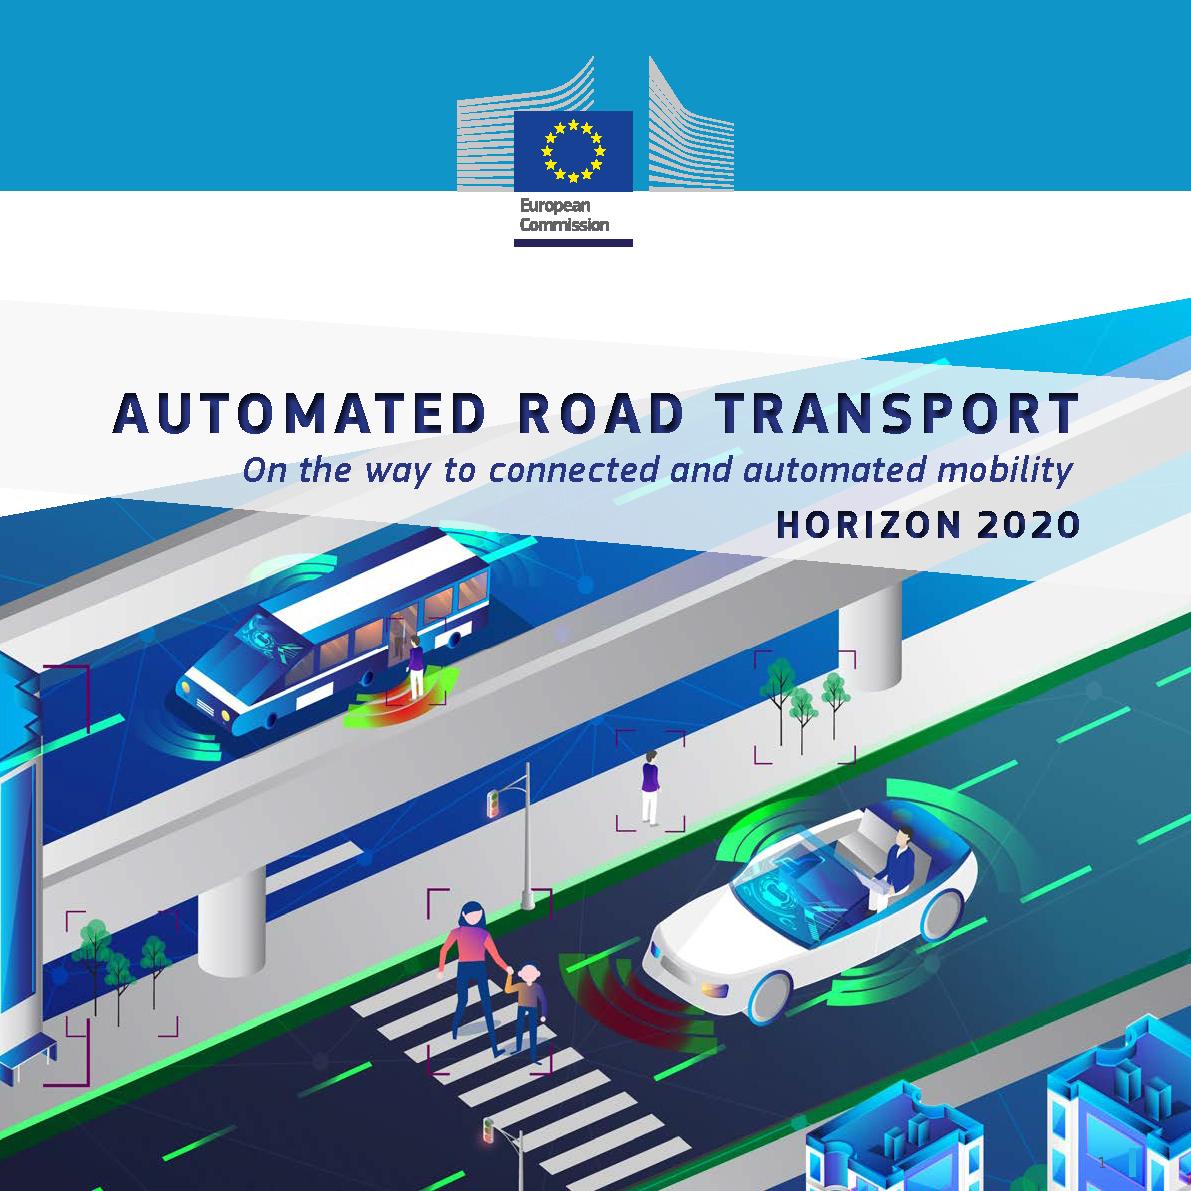 During #EUCAD2019 (connectedautomateddriving.eu/eucad2019/ ) on 2-3 April @interACT_EU together with @BRAVE_H2020 & @TrustVehicle_EU will be at the information stand No 3! Don't miss the chance to visit us and check @interACT_EU pedestrian simulator! #EUTransportResearch #AutomatedVehicles